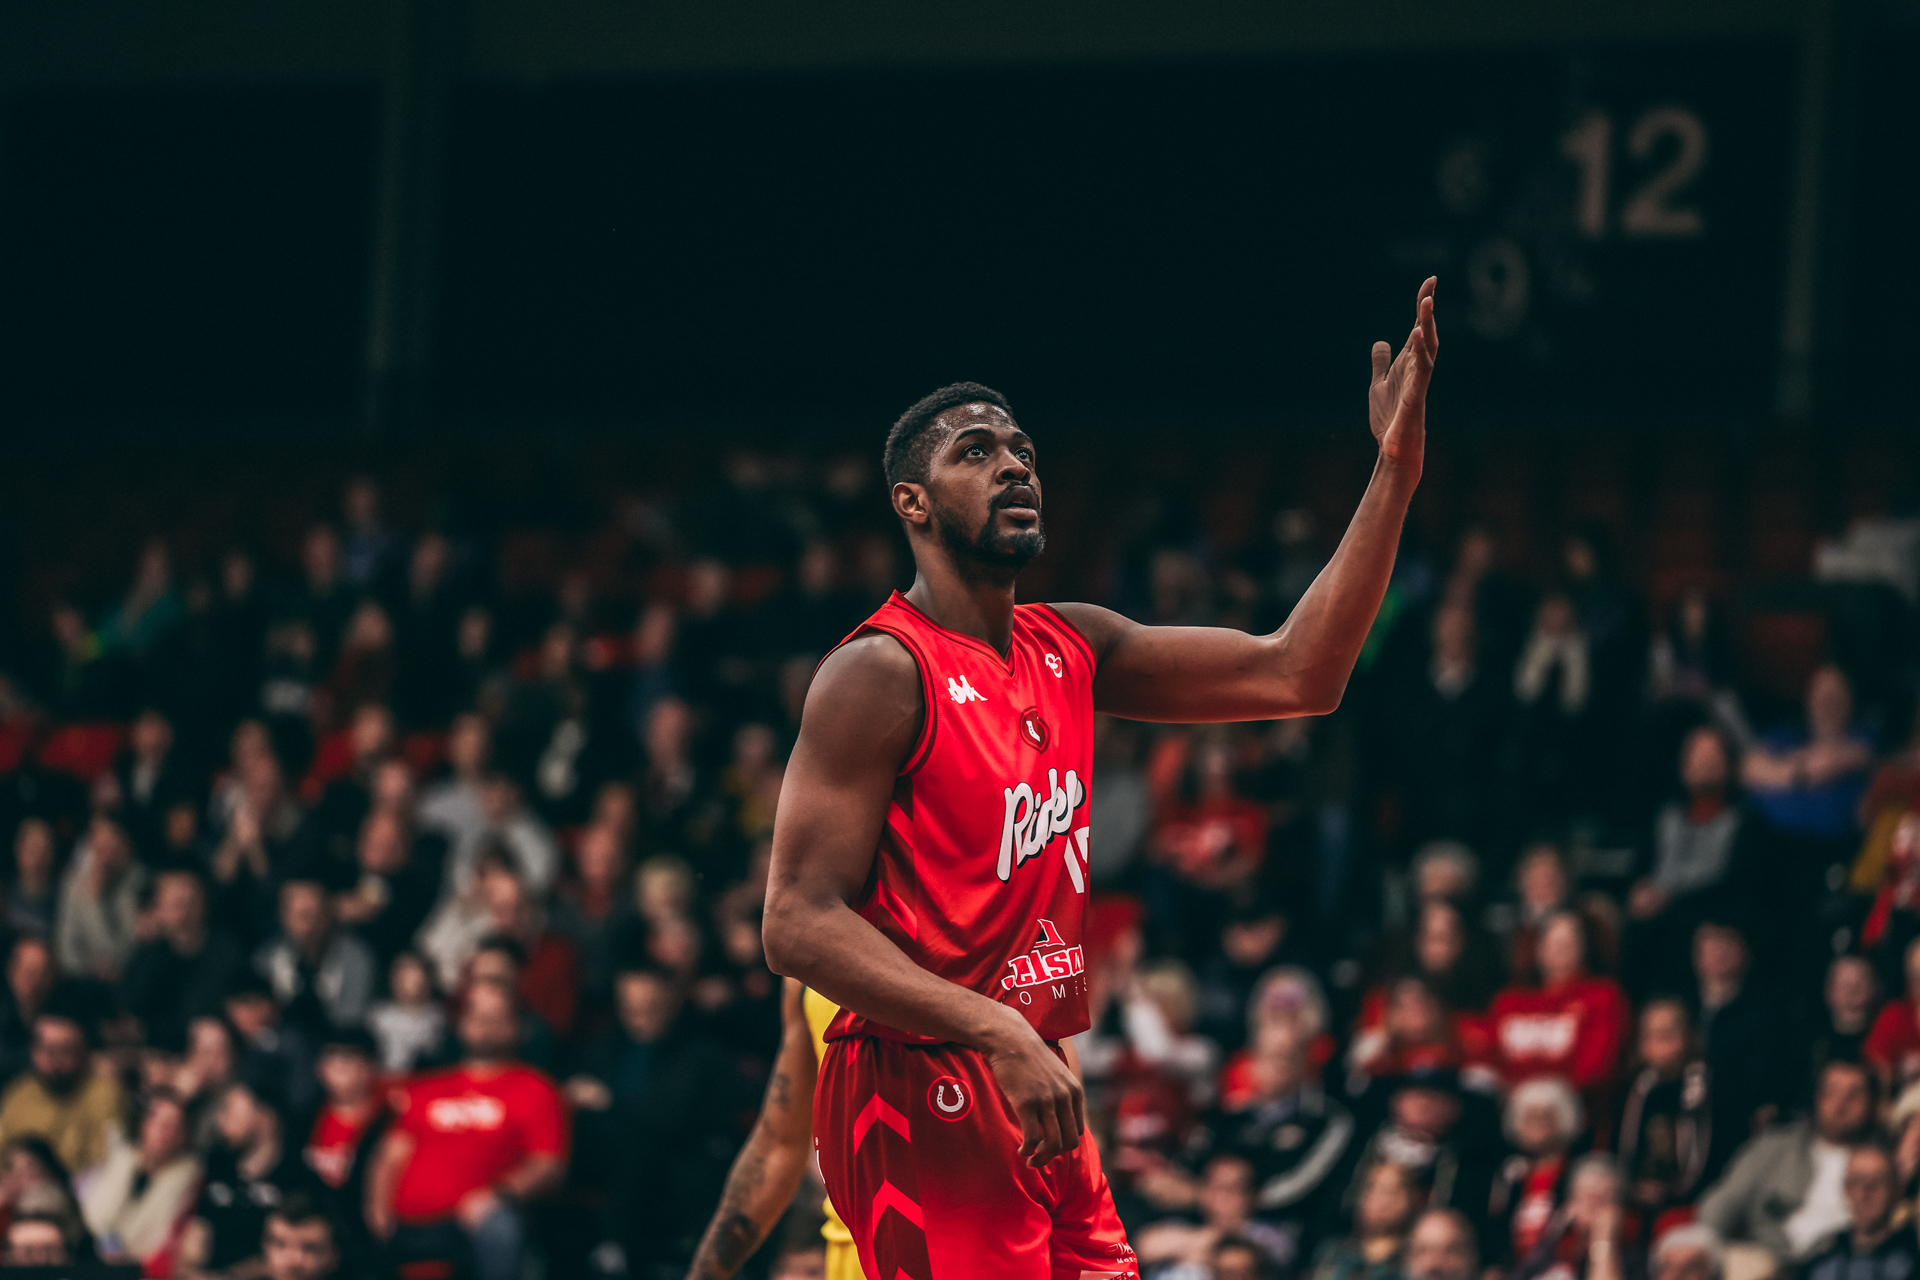 “It’s definitely a rivalry”- Duke Shelton on facing his former team, the Newcastle Eagles